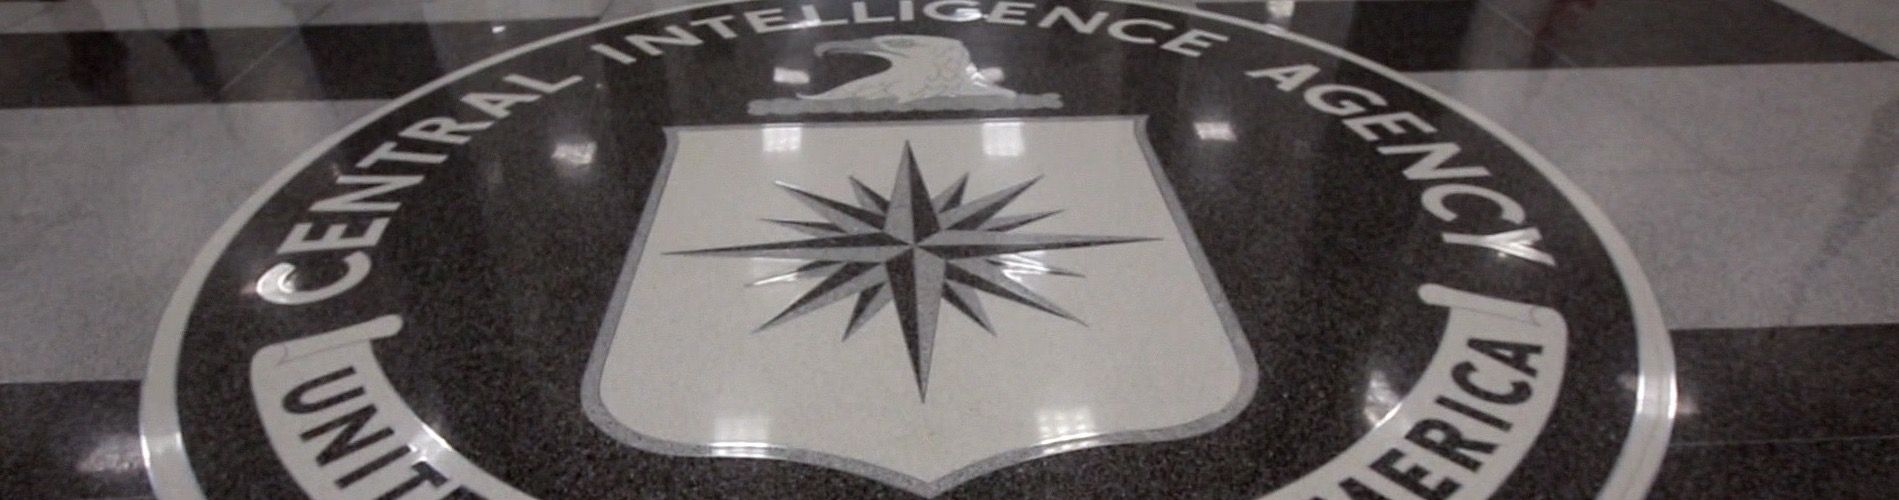 So You Want to Work for the CIA?